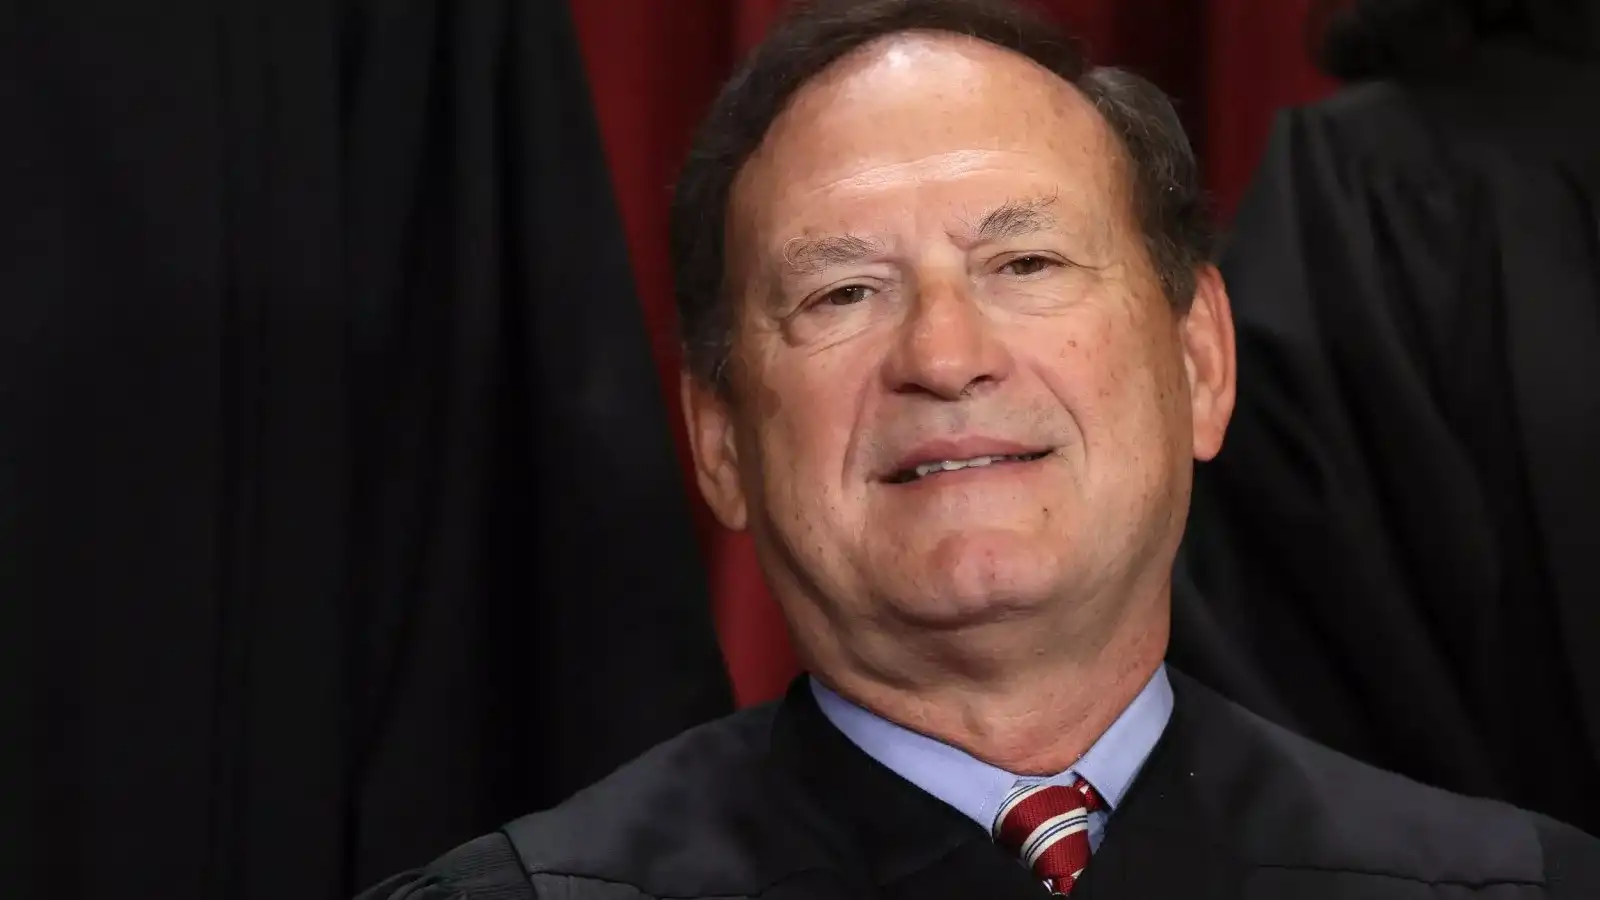 Retired conservative judge rebukes Samuel Alito as 'Beyond the pale'